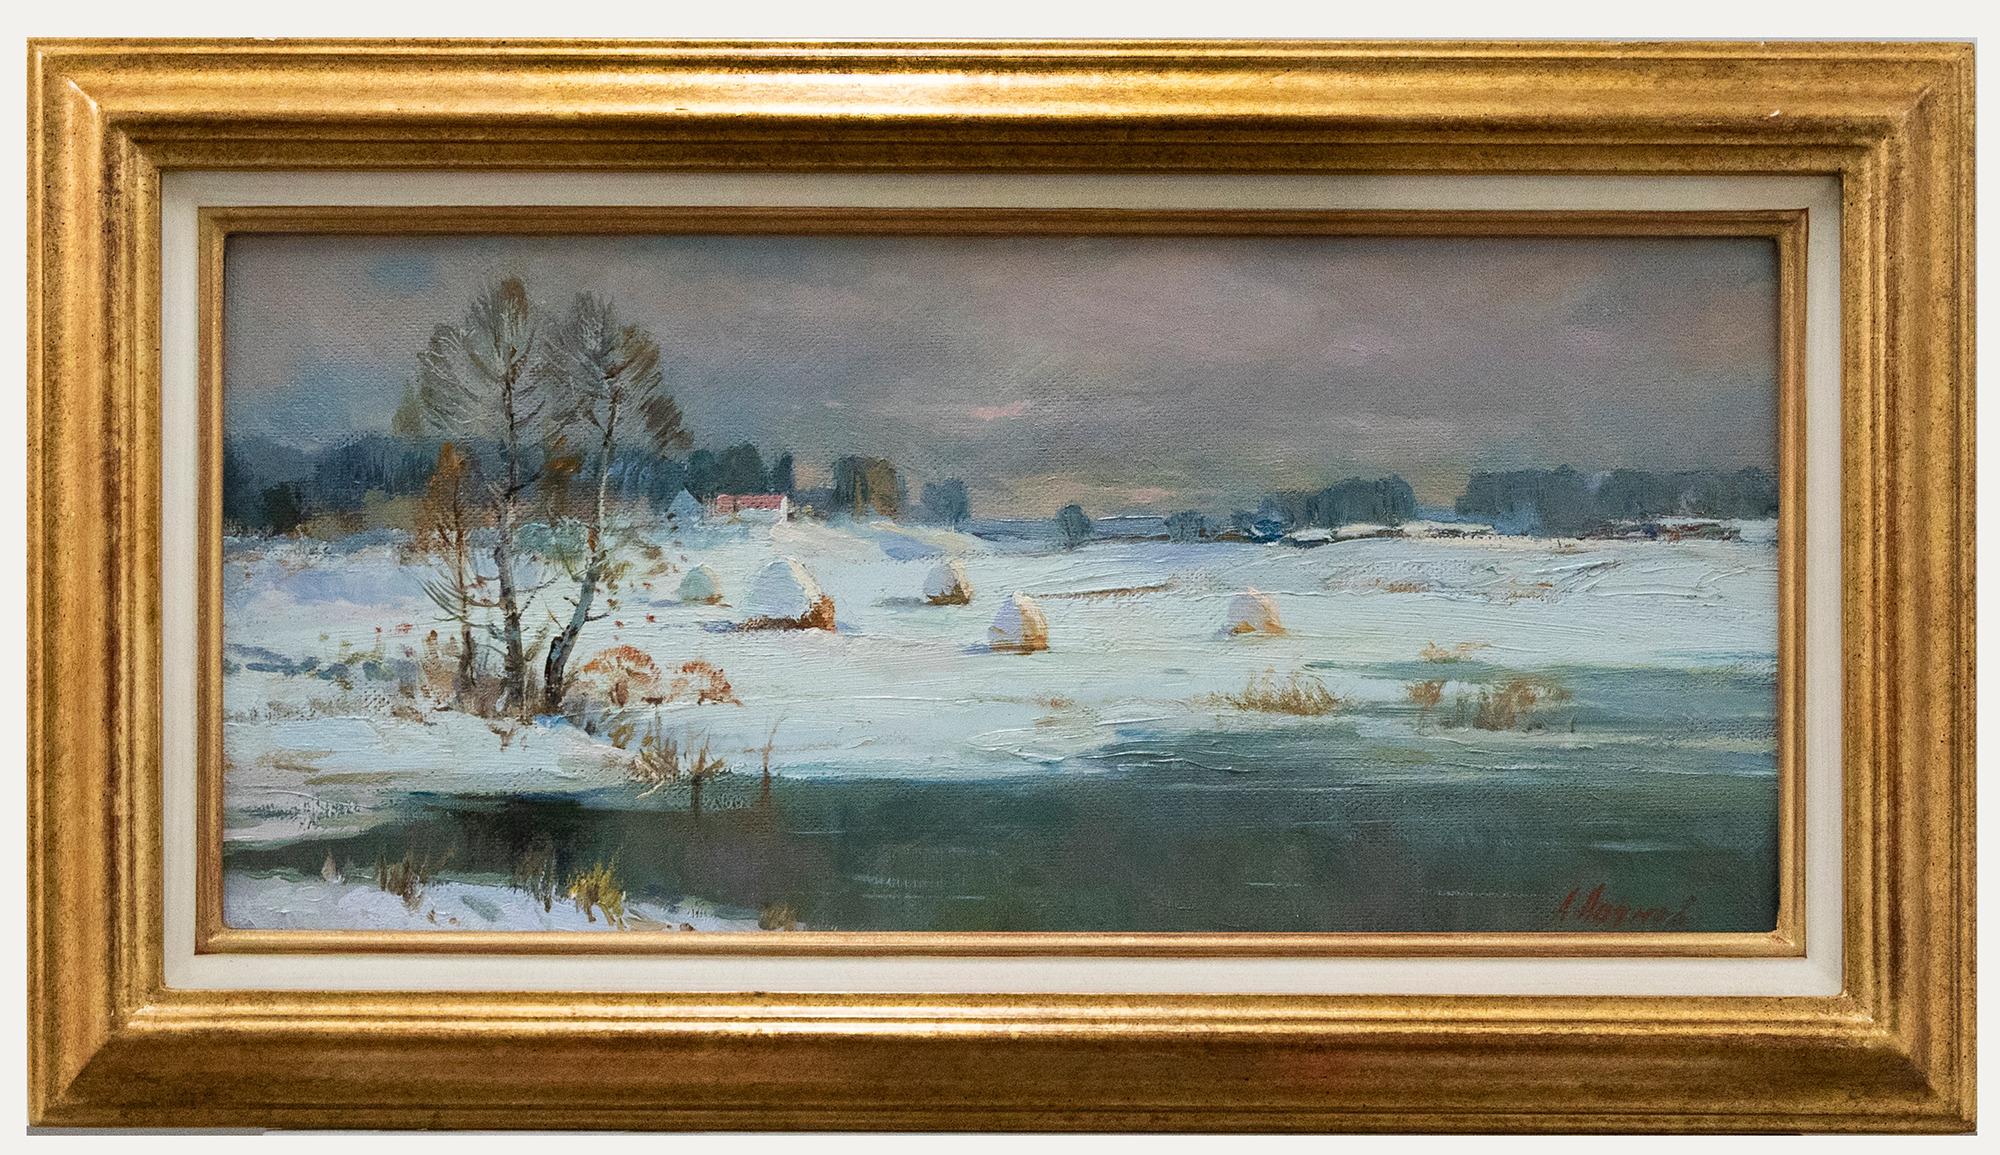 Unknown Landscape Painting - Anatoly Nikolaevich Ladnov (b.1935) - Russian  20th Century Oil, A Frosty Day